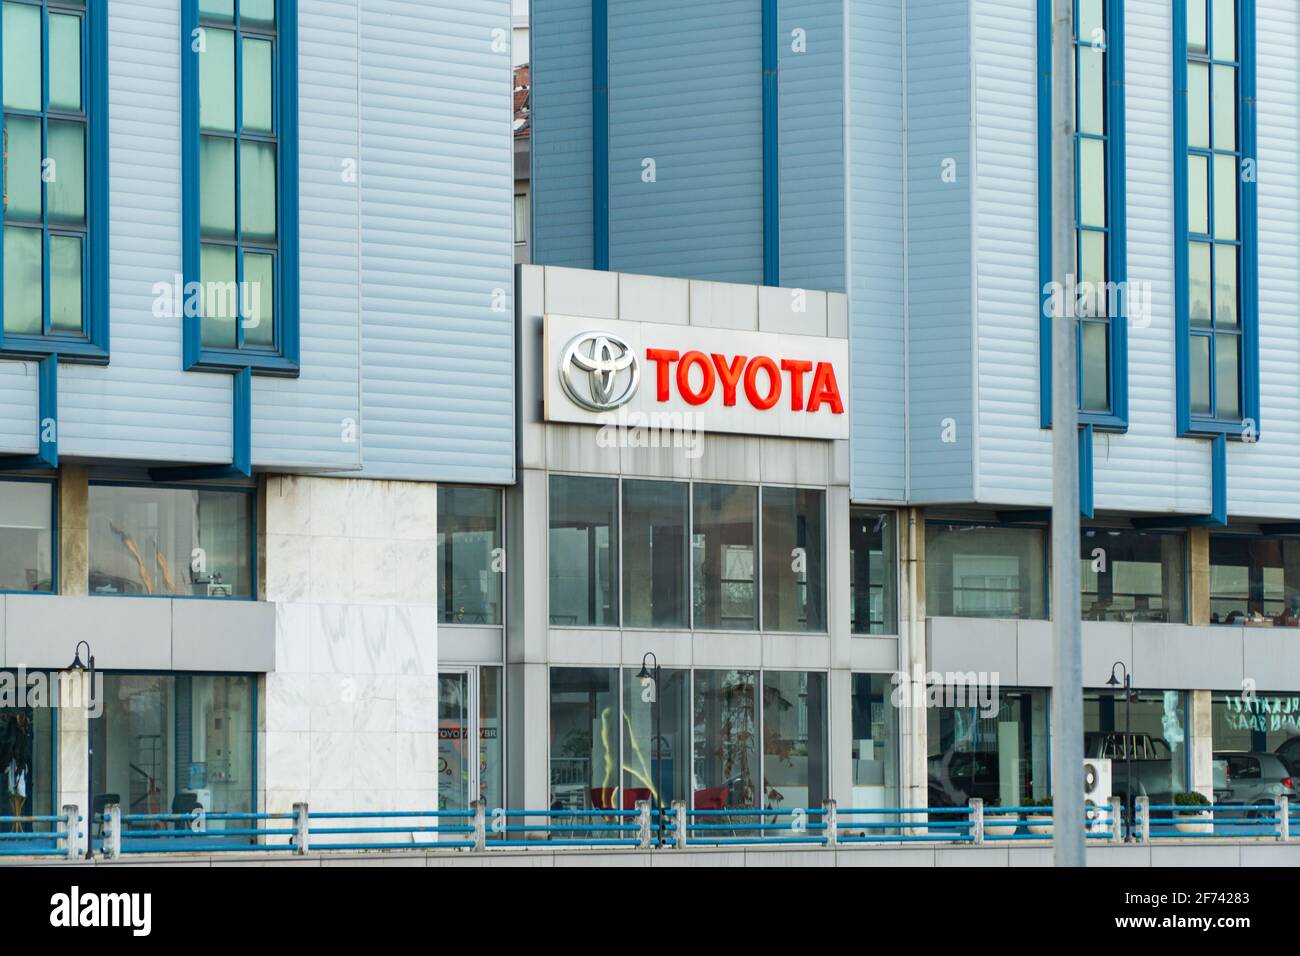 Istanbul branch of Toyota Stock Photo